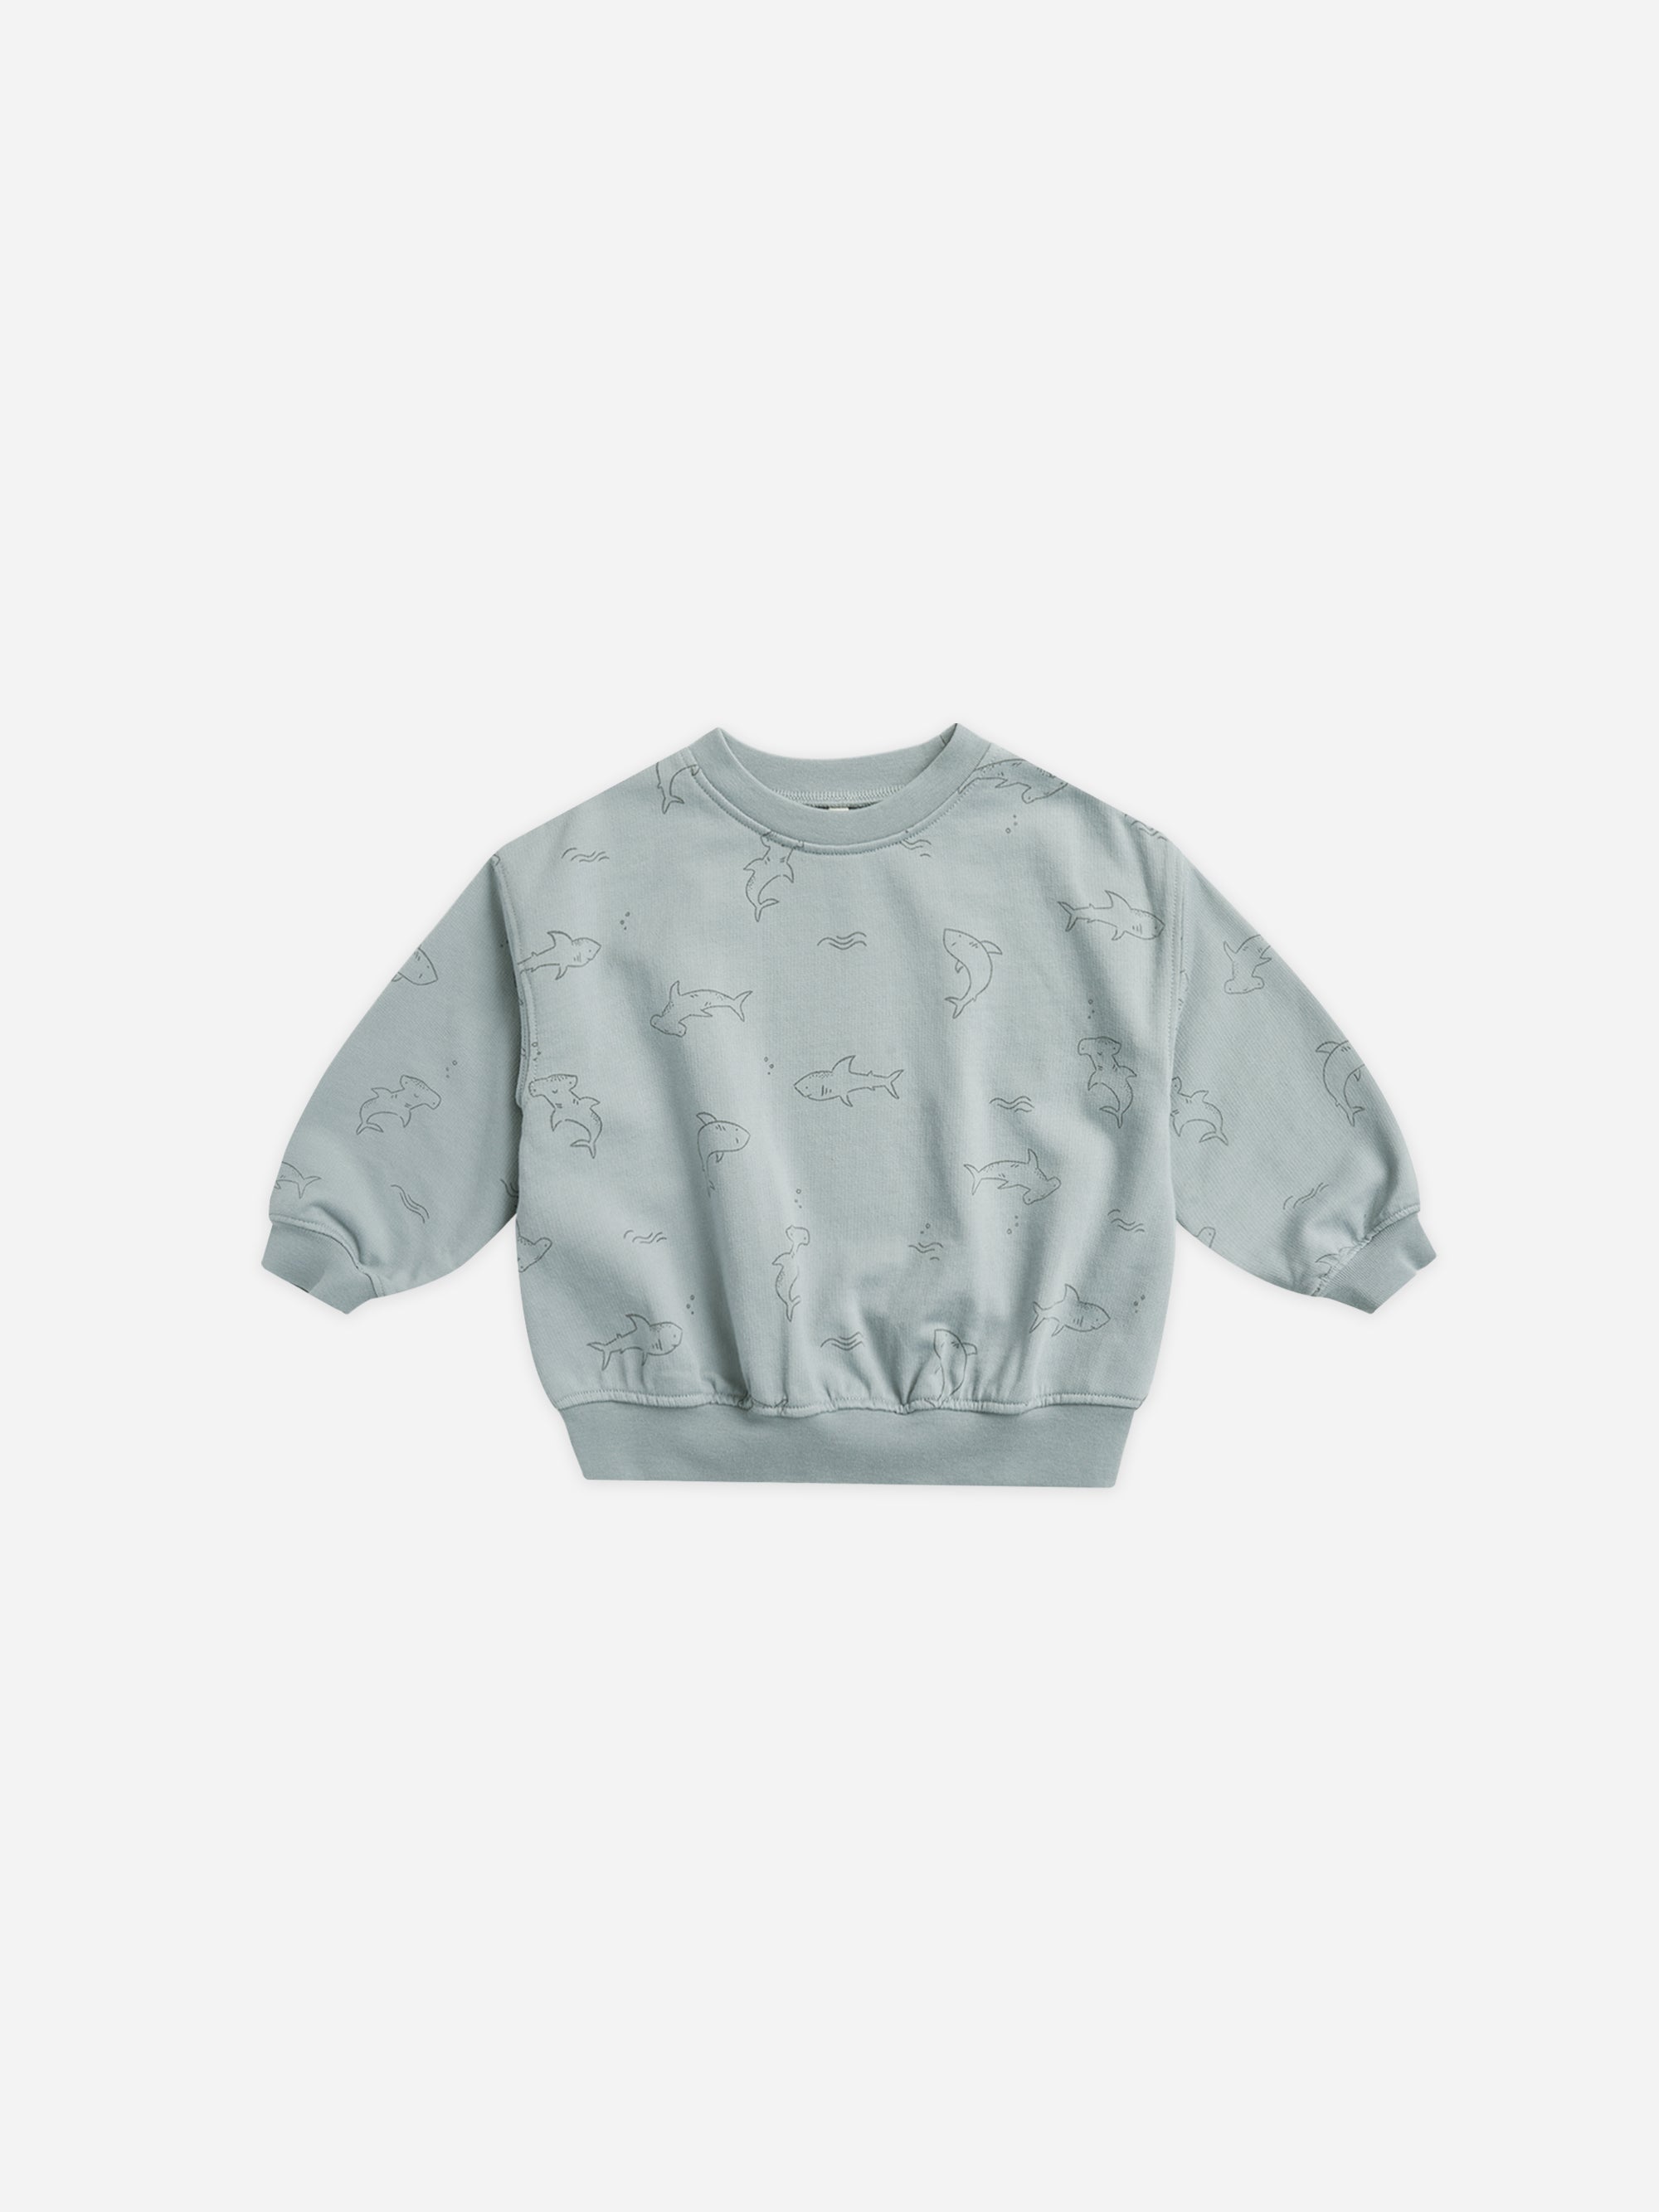 Sweatshirt || Sharks - Rylee + Cru | Kids Clothes | Trendy Baby Clothes | Modern Infant Outfits |